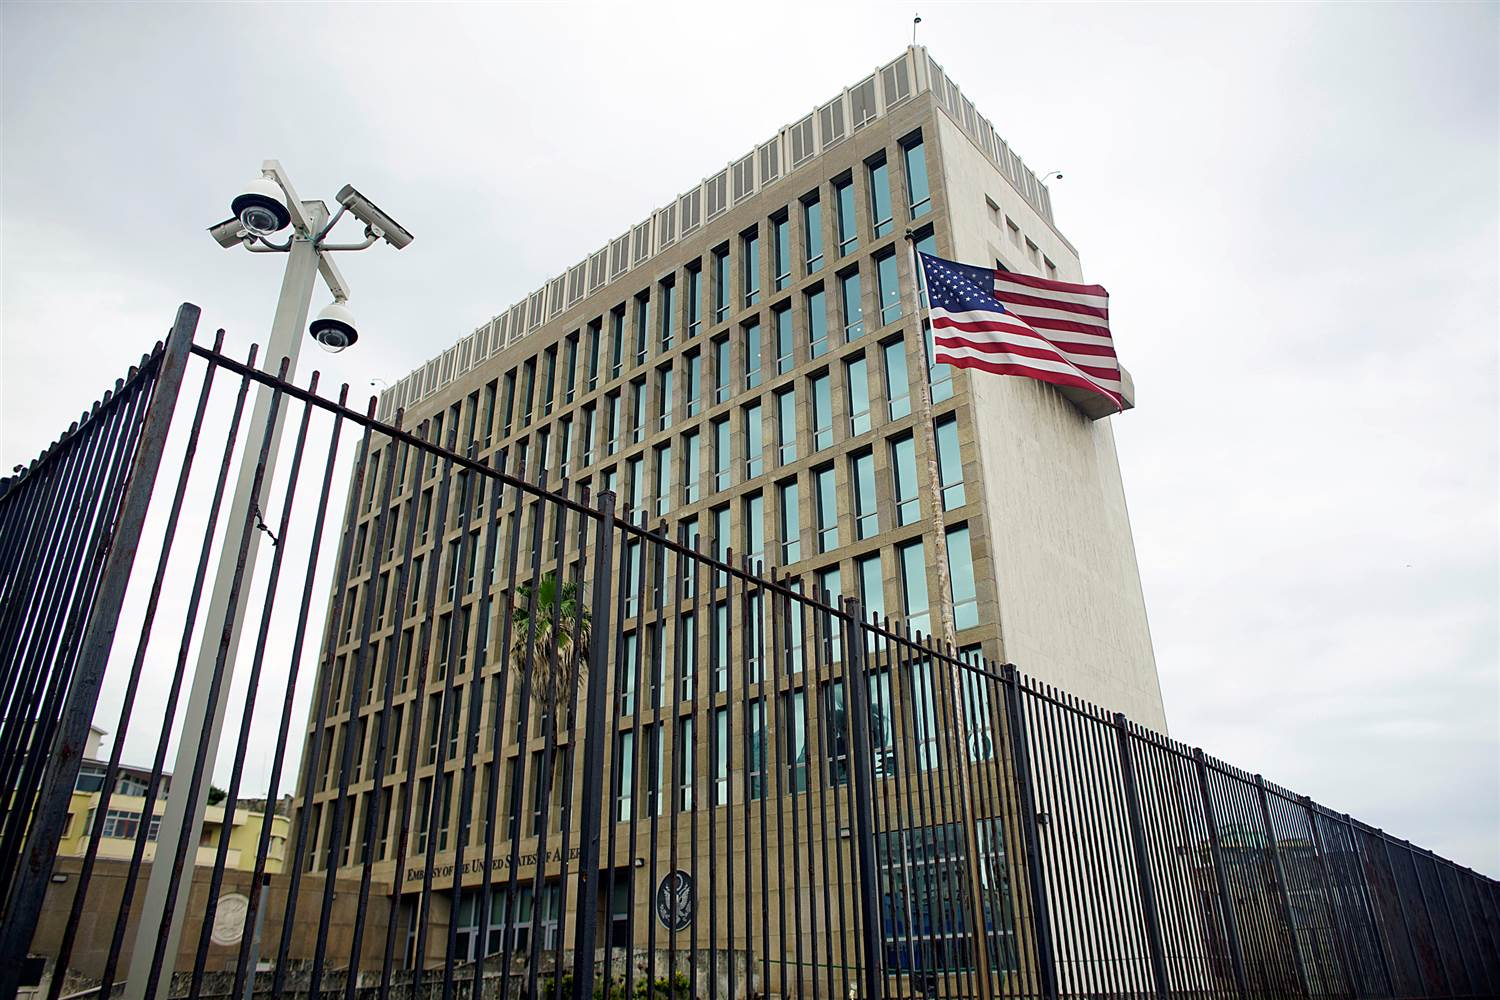 Here is the sound used to attack US diplomats in Cuba